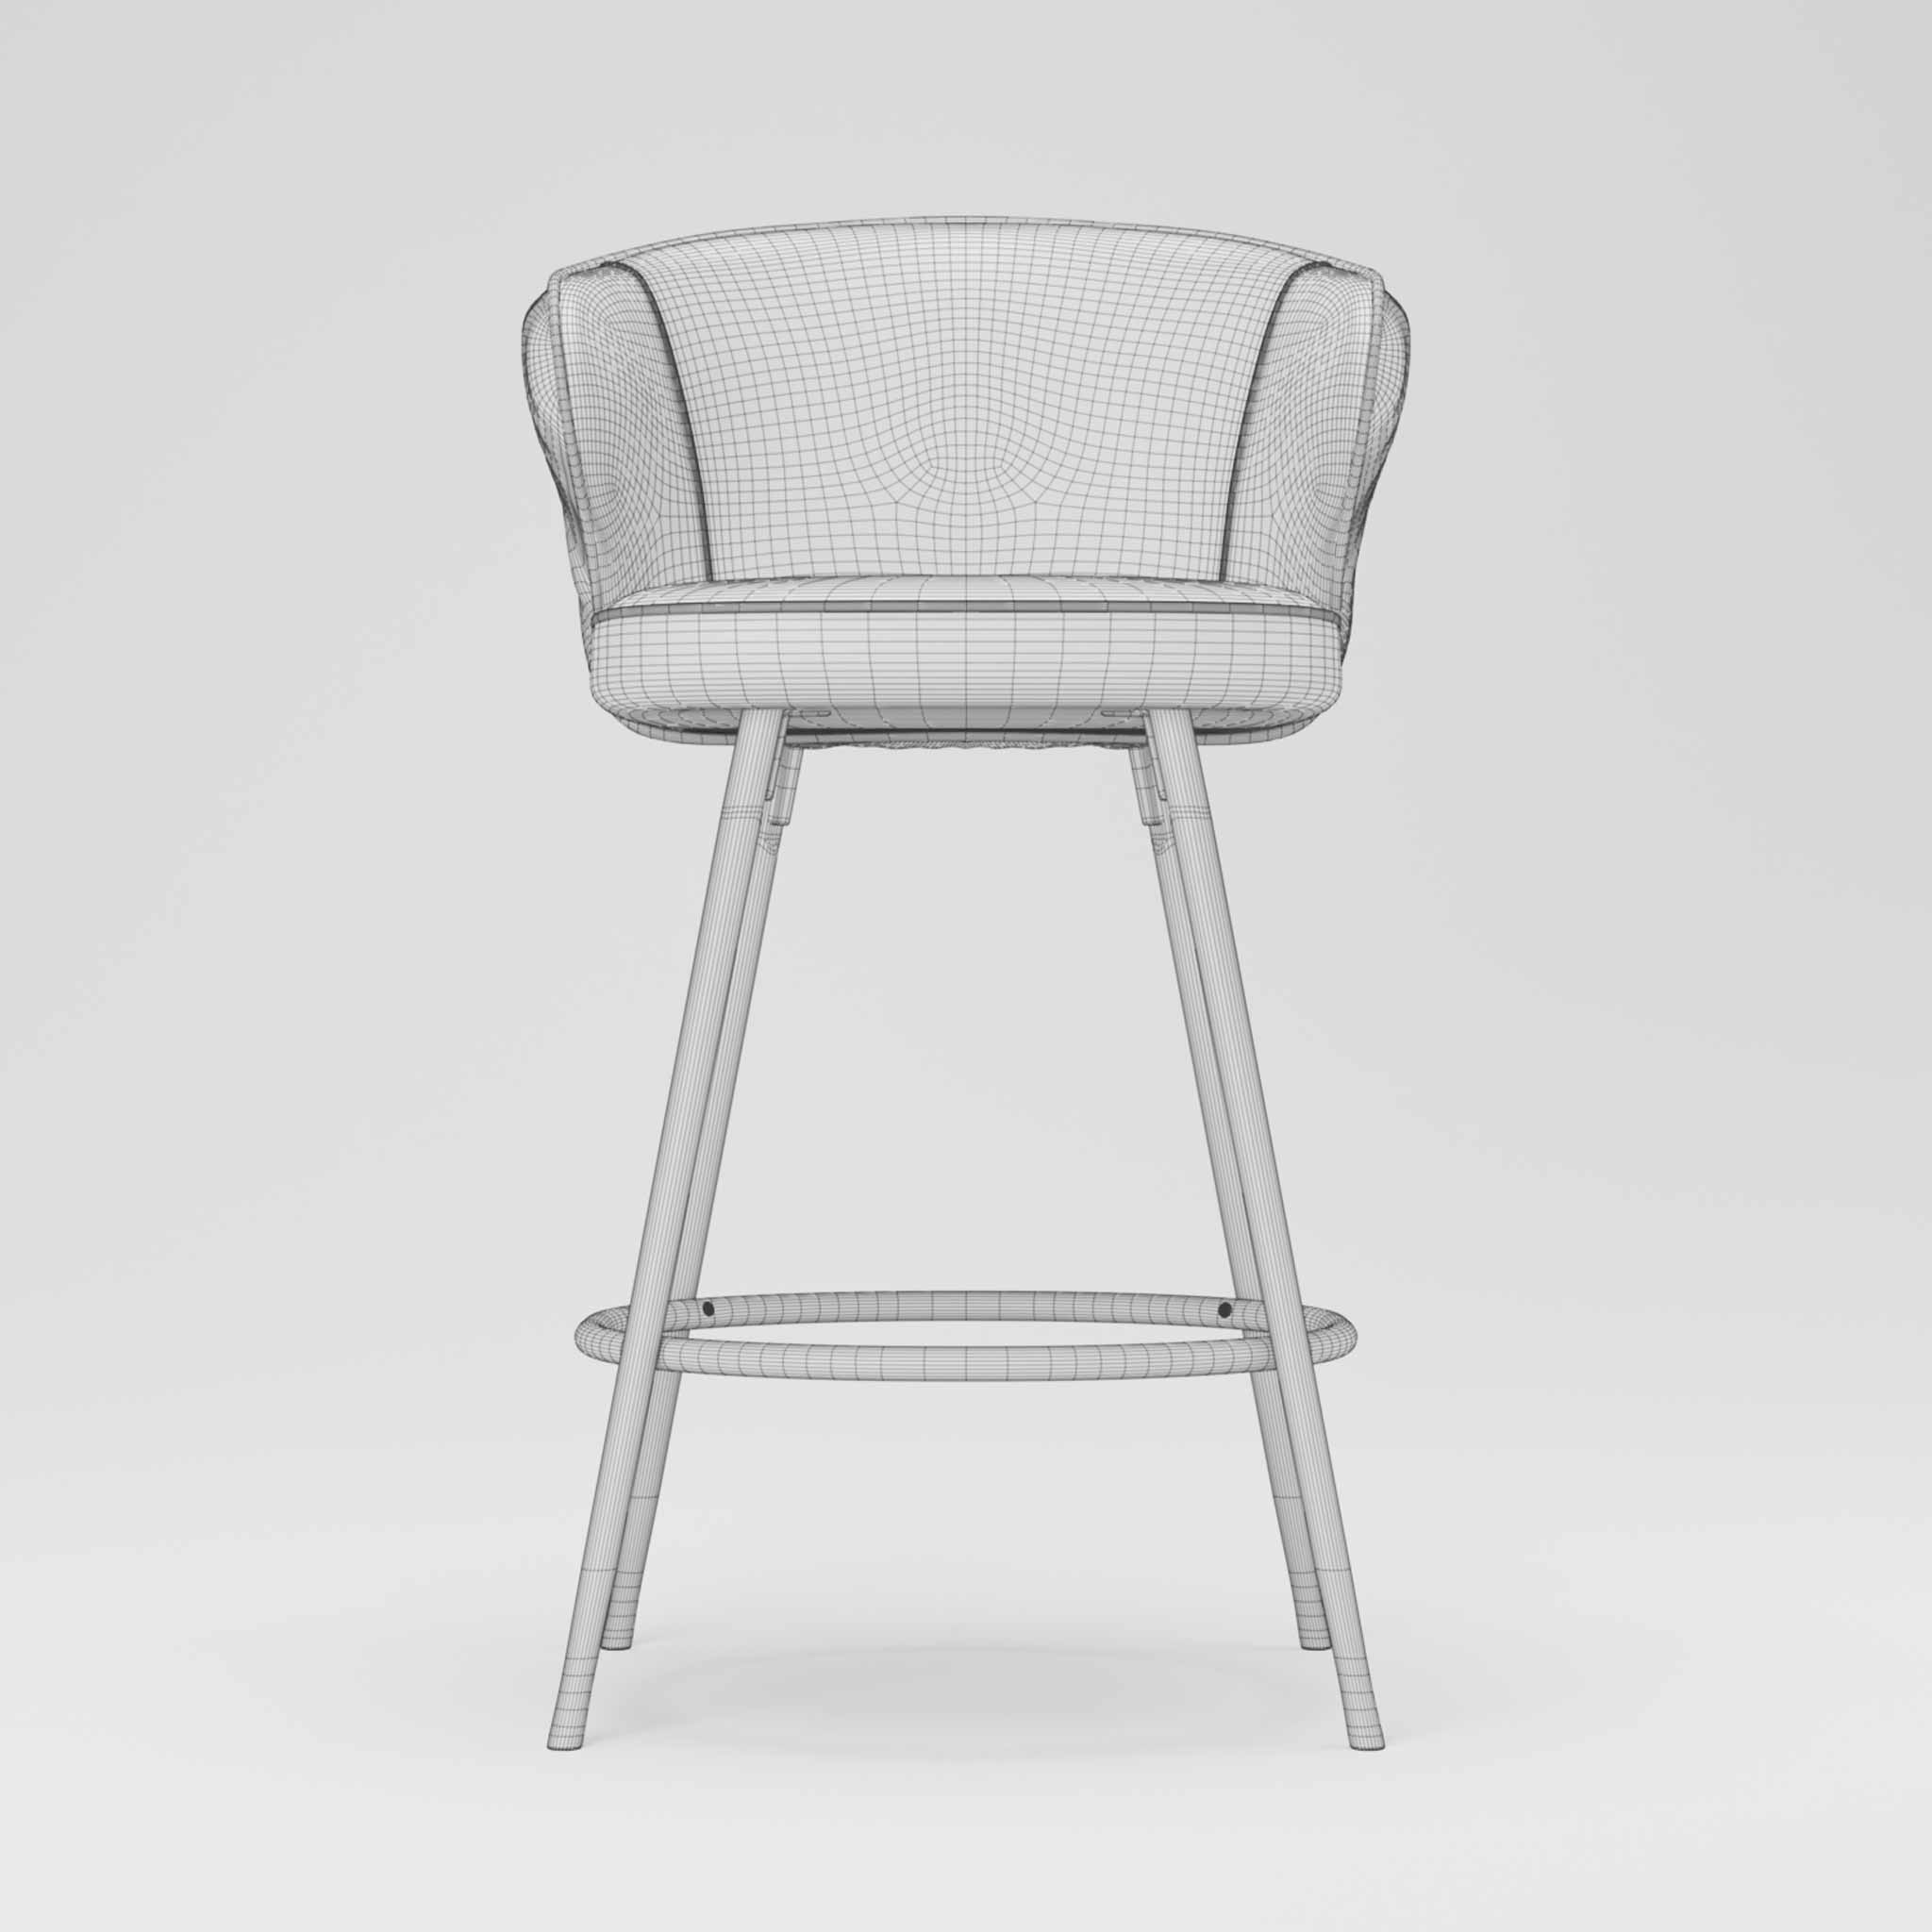 3D_Chair_Modeling_Wireframe